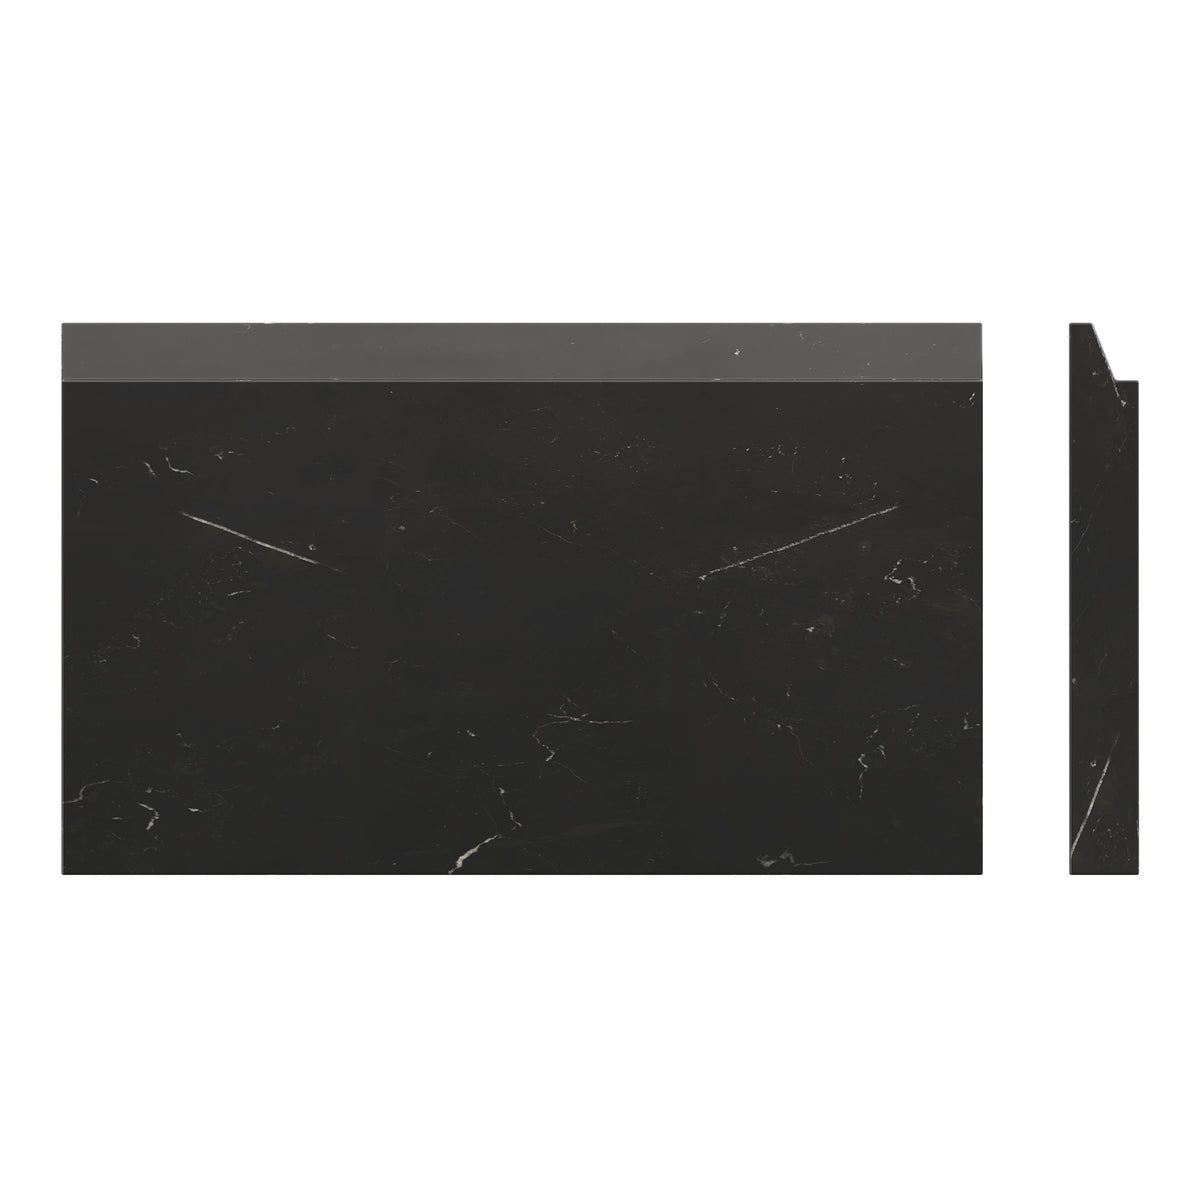 Craftsman Base shown in Nero Marble Honed. Main Product Slider View